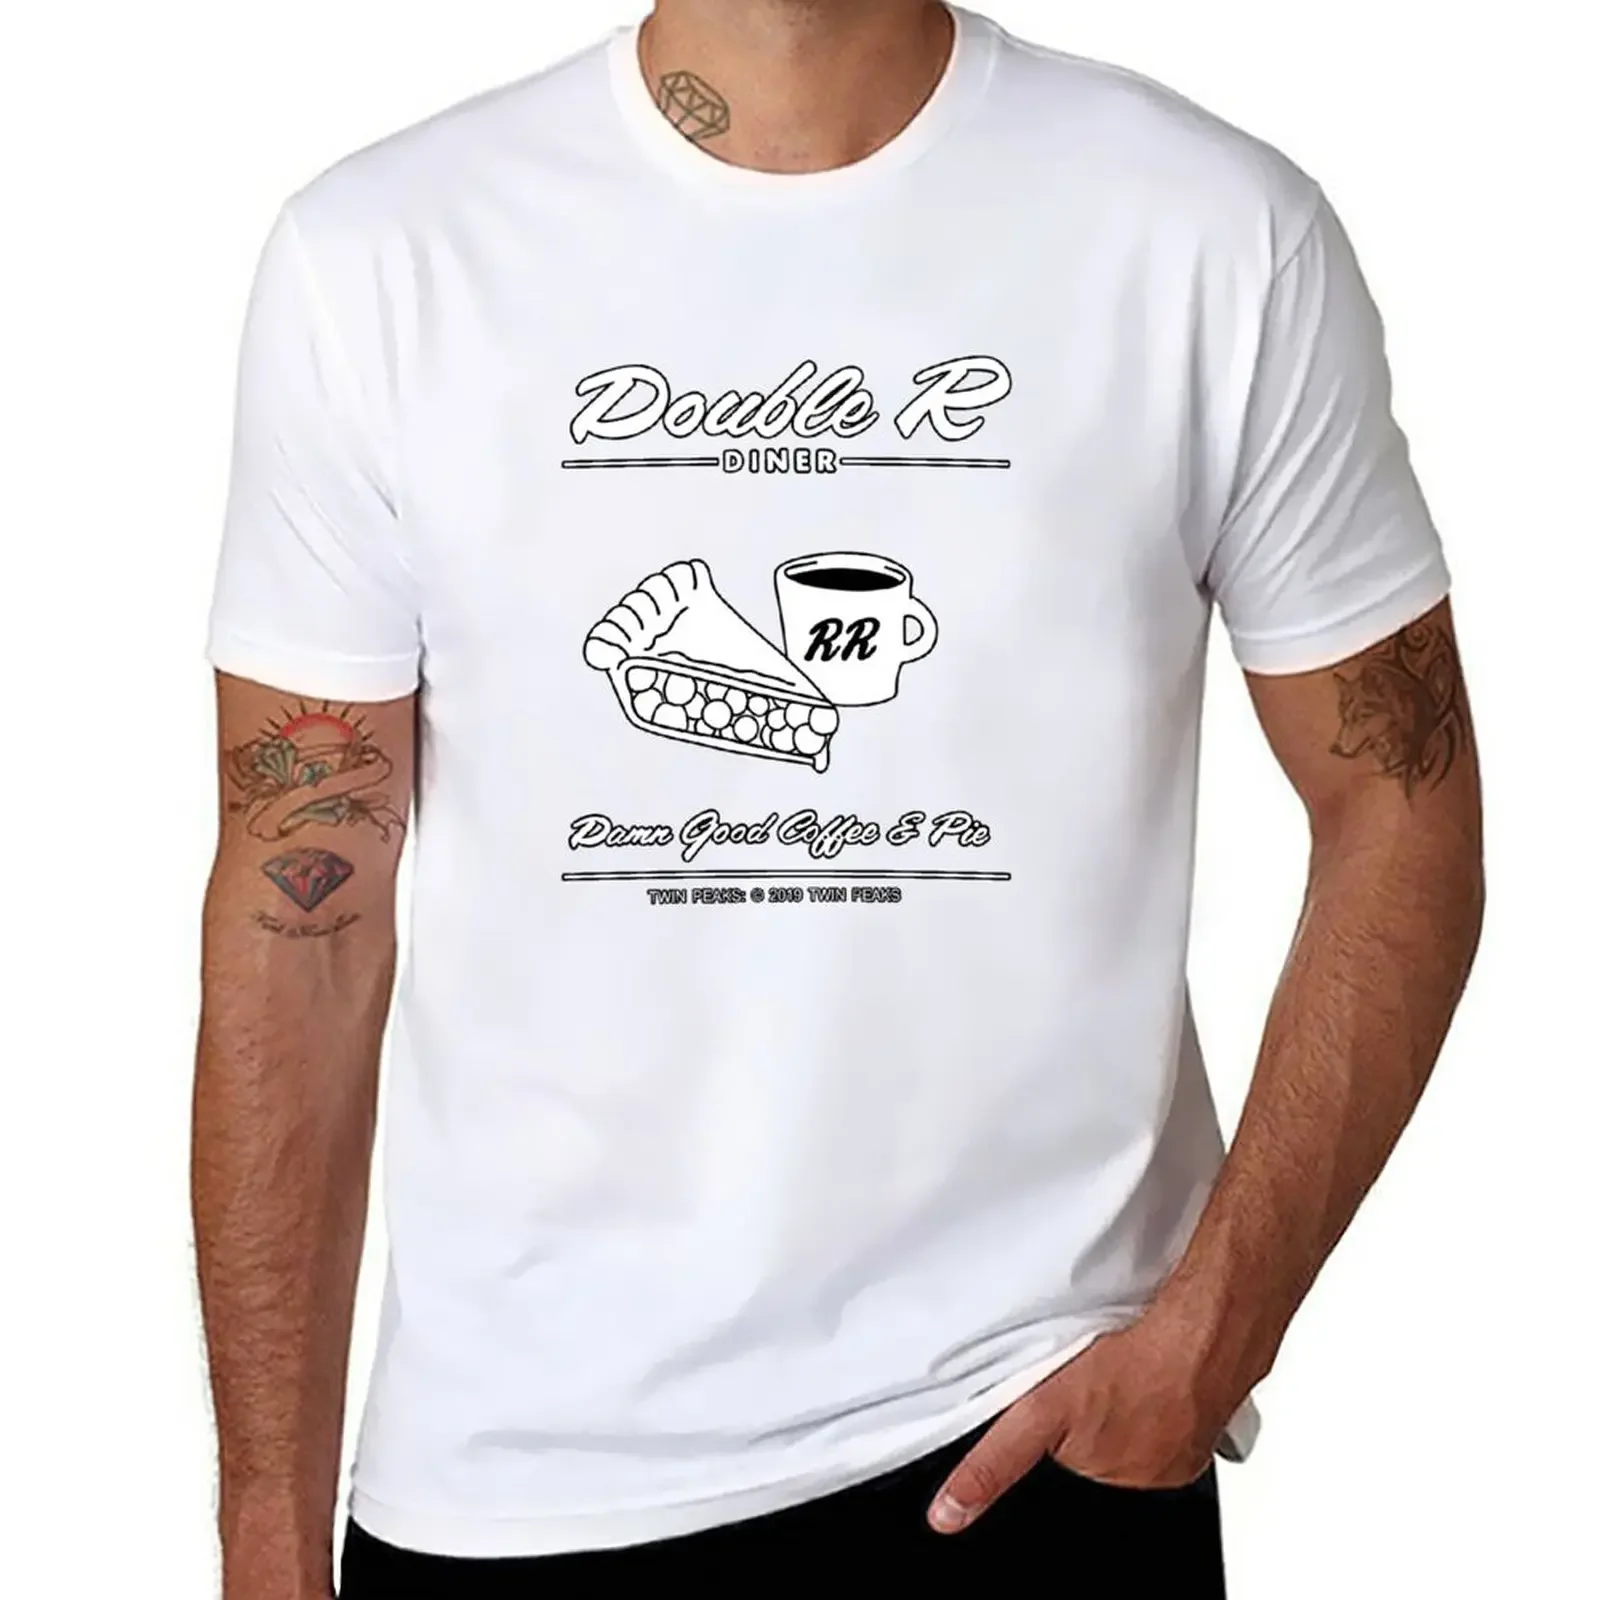 

Double R Diner - Twin Peaks T-Shirt oversizeds animal prinfor boys cute clothes vintage t shirt men